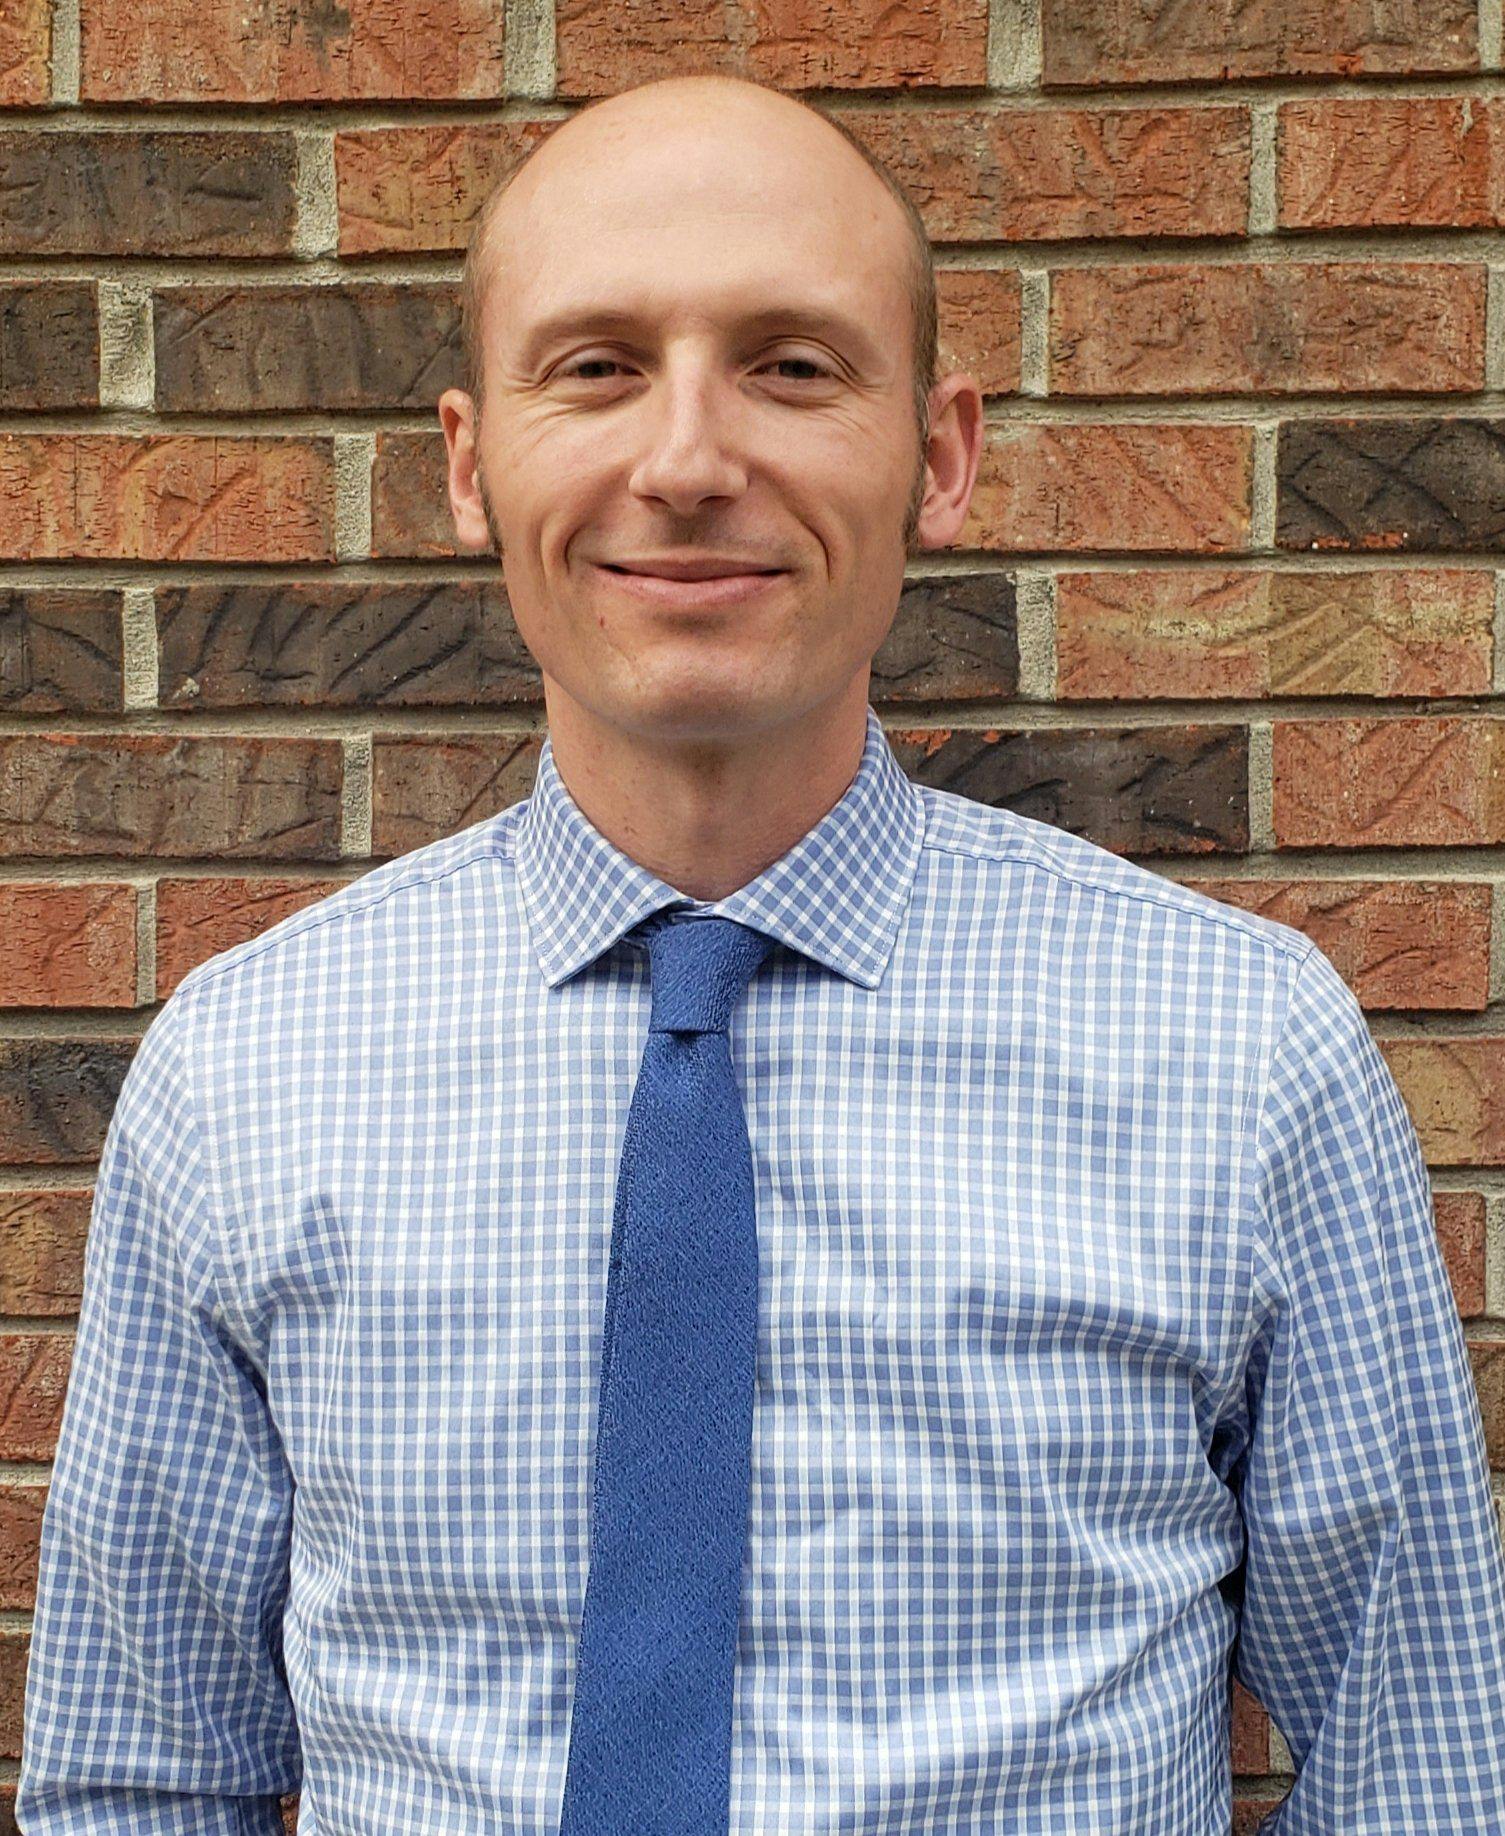 S. Wade Kimmell, OD, is part of an OD-MD practice in Indianapolis